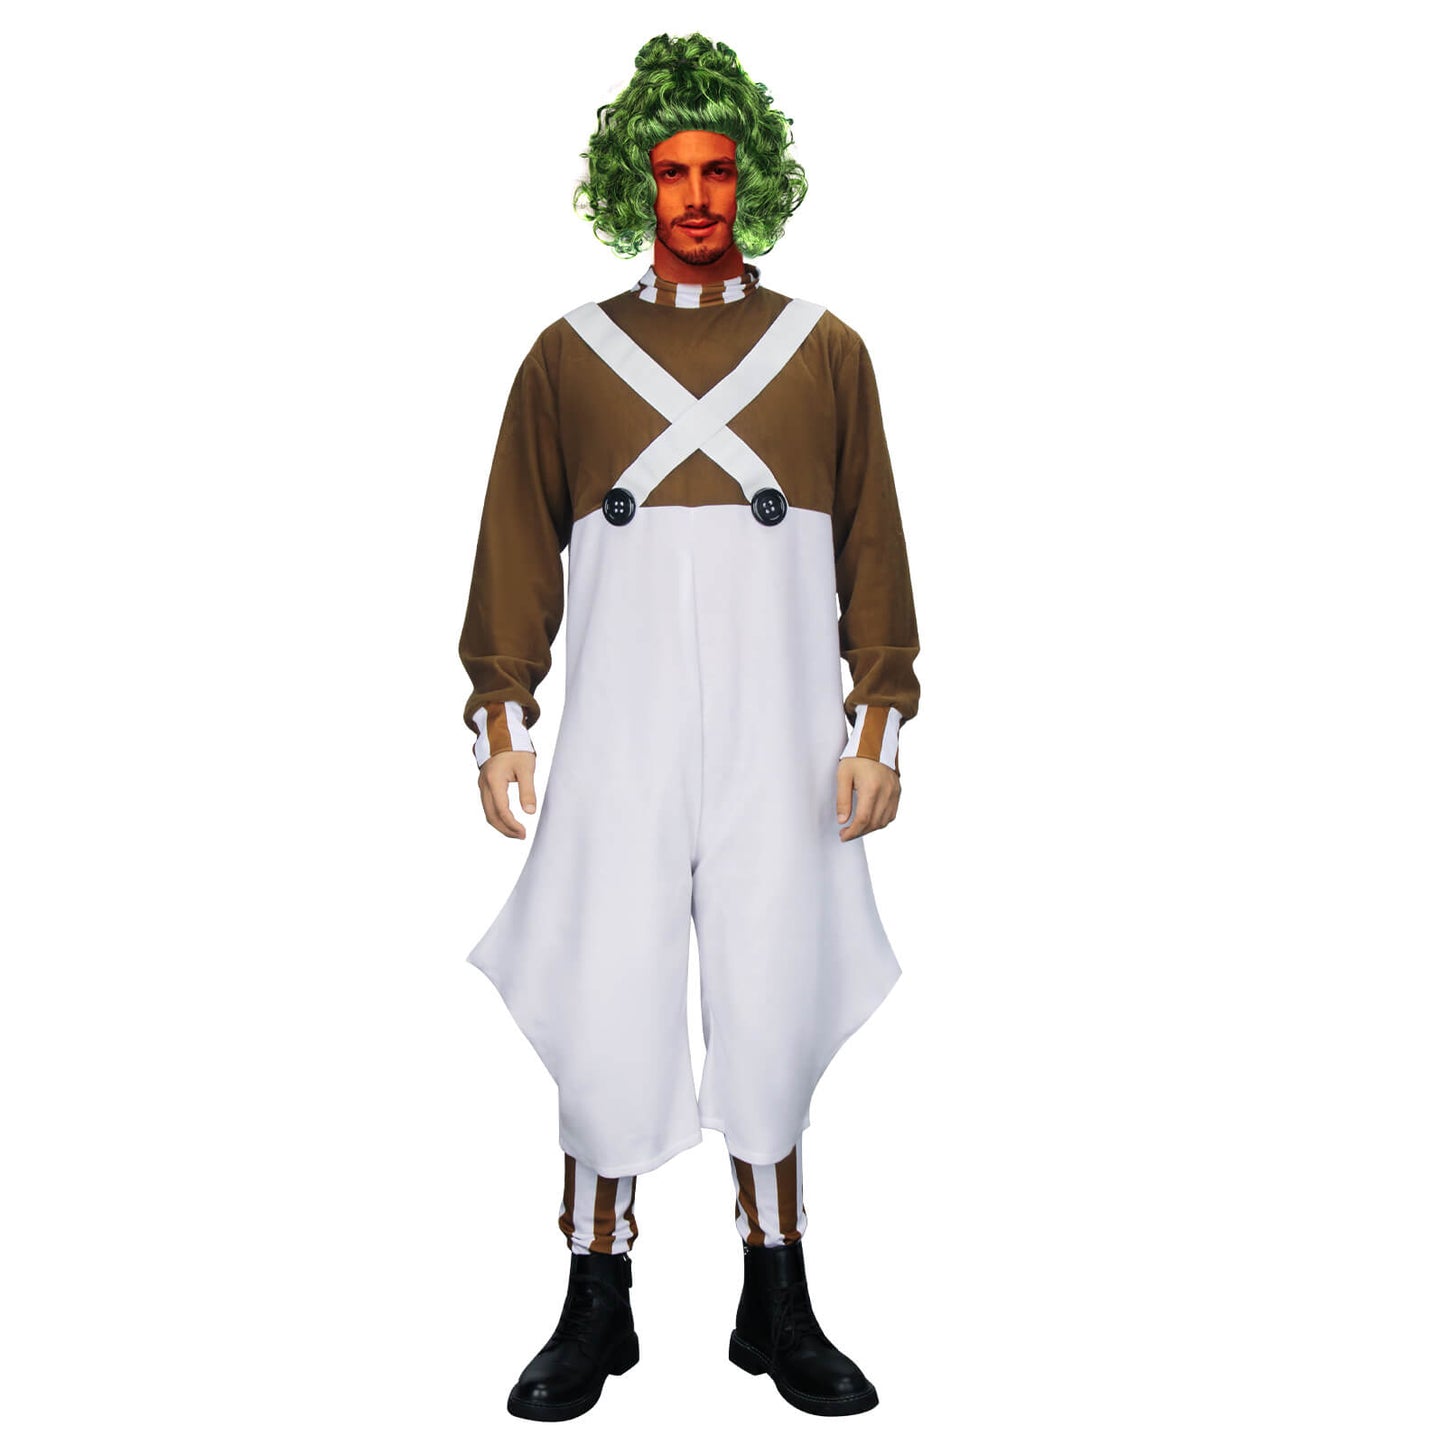 Oompa Loompa Cosplay Costume Wig Charlie and the Chocolate Factory (Ready to Ship)